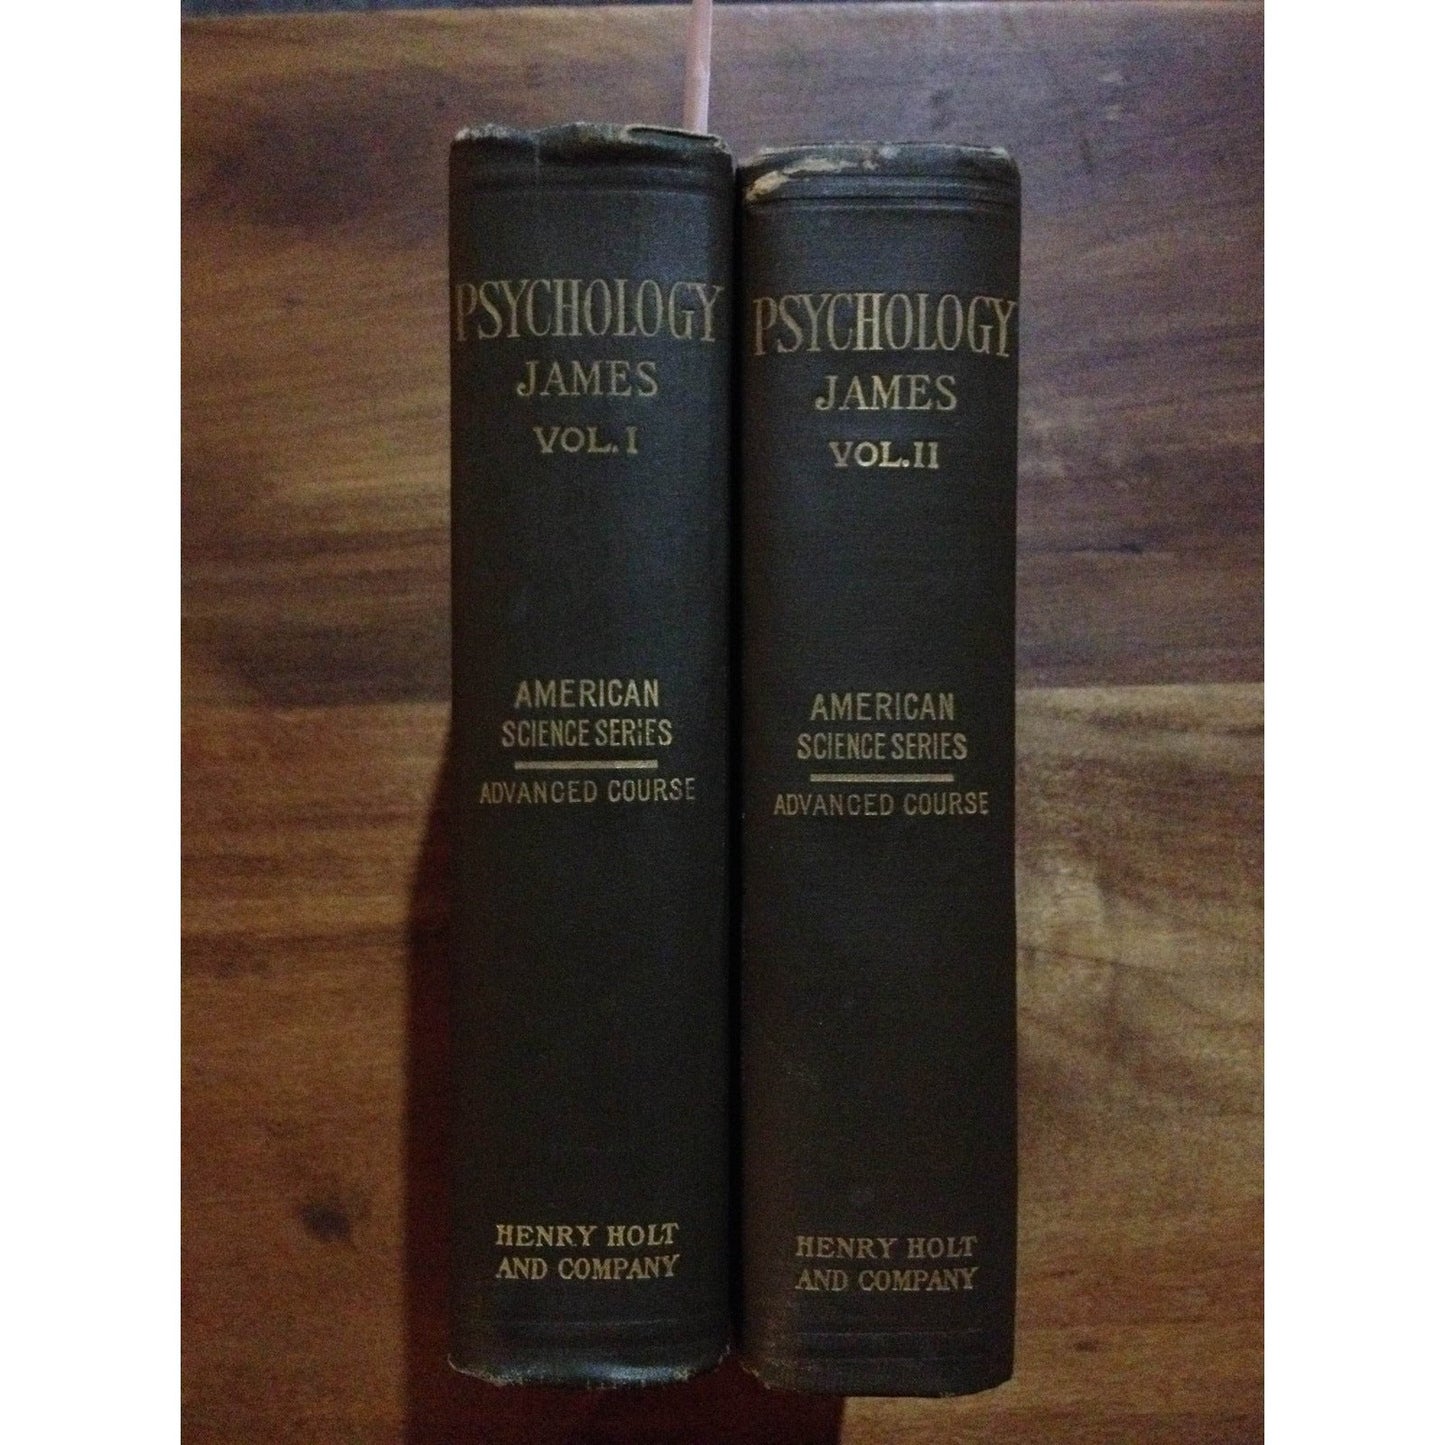 THE PRINCIPLES OF PSYCHOLOGY  BY:  WILLIAM JAMES [2 VOL] BooksCardsNBikes